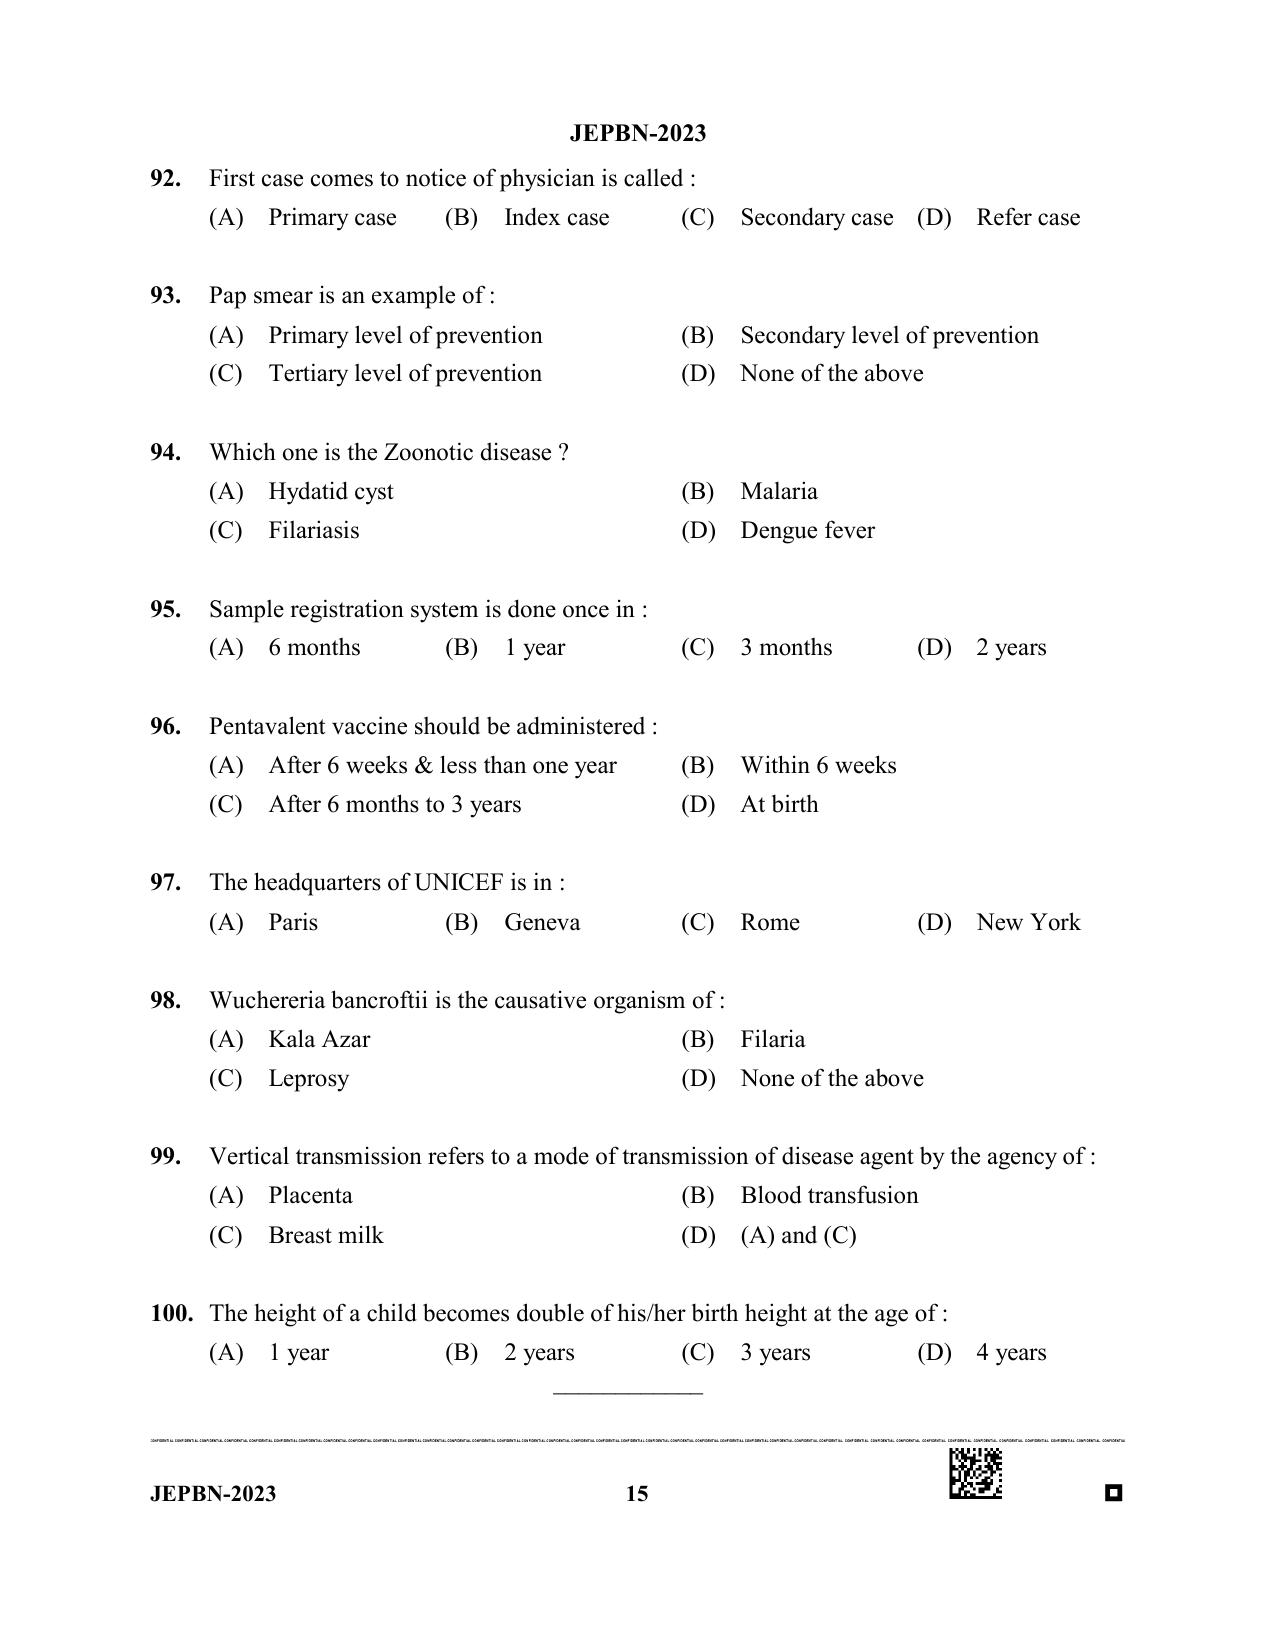 WBJEE JEPBN 2023 Question Paper - Page 15